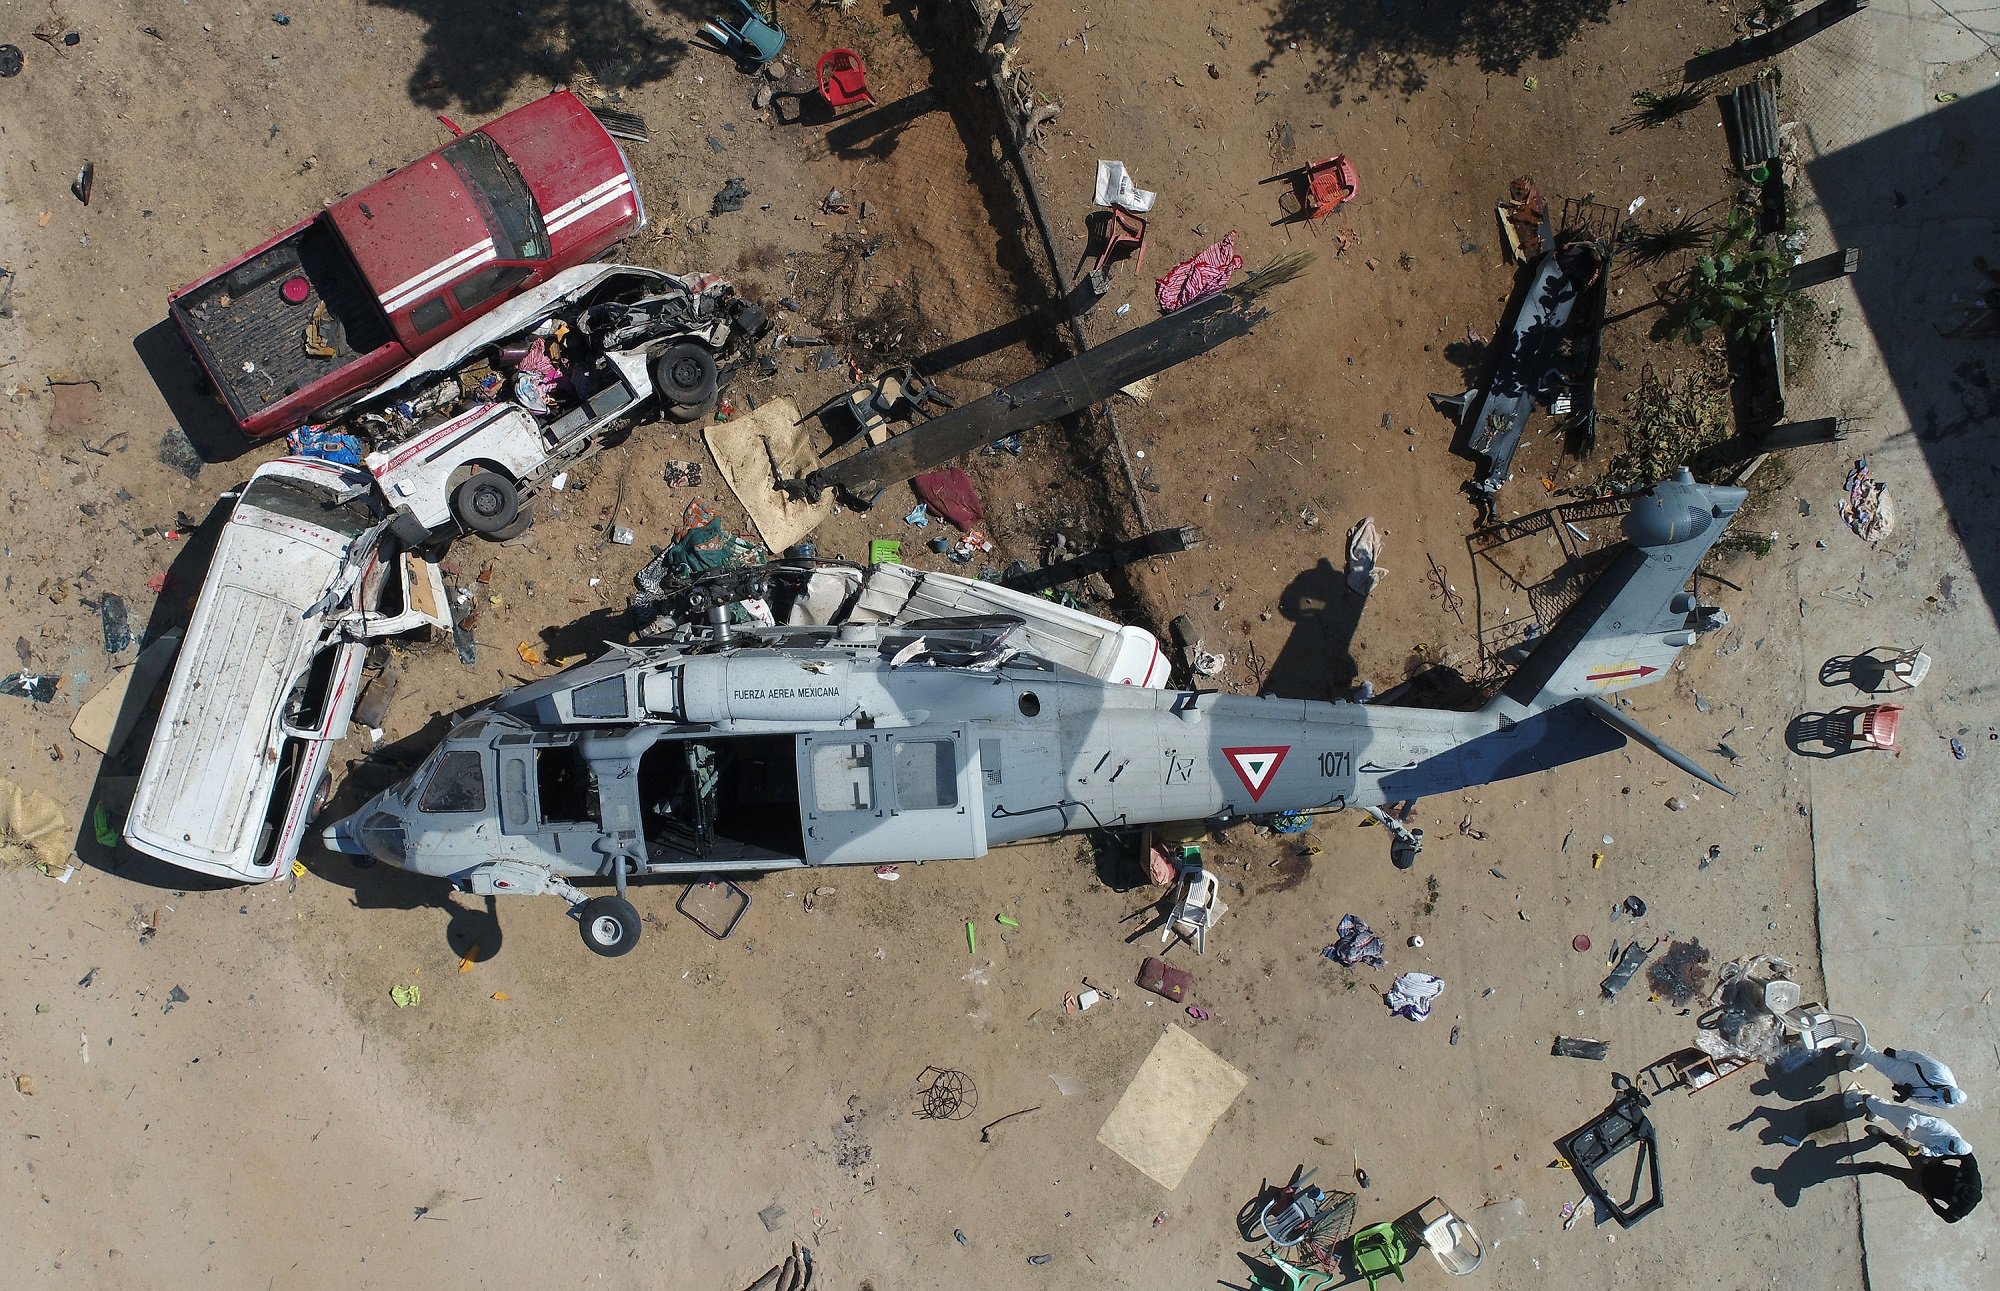 Aerial view of the military helicopter that fell on a van in Santiago Jamiltepec, Oaxaca state, Mexico, on February 17, 2018.  A 7.2-magnitude earthquake rattled Mexico on Friday, causing little damage but triggering a tragedy when a minister